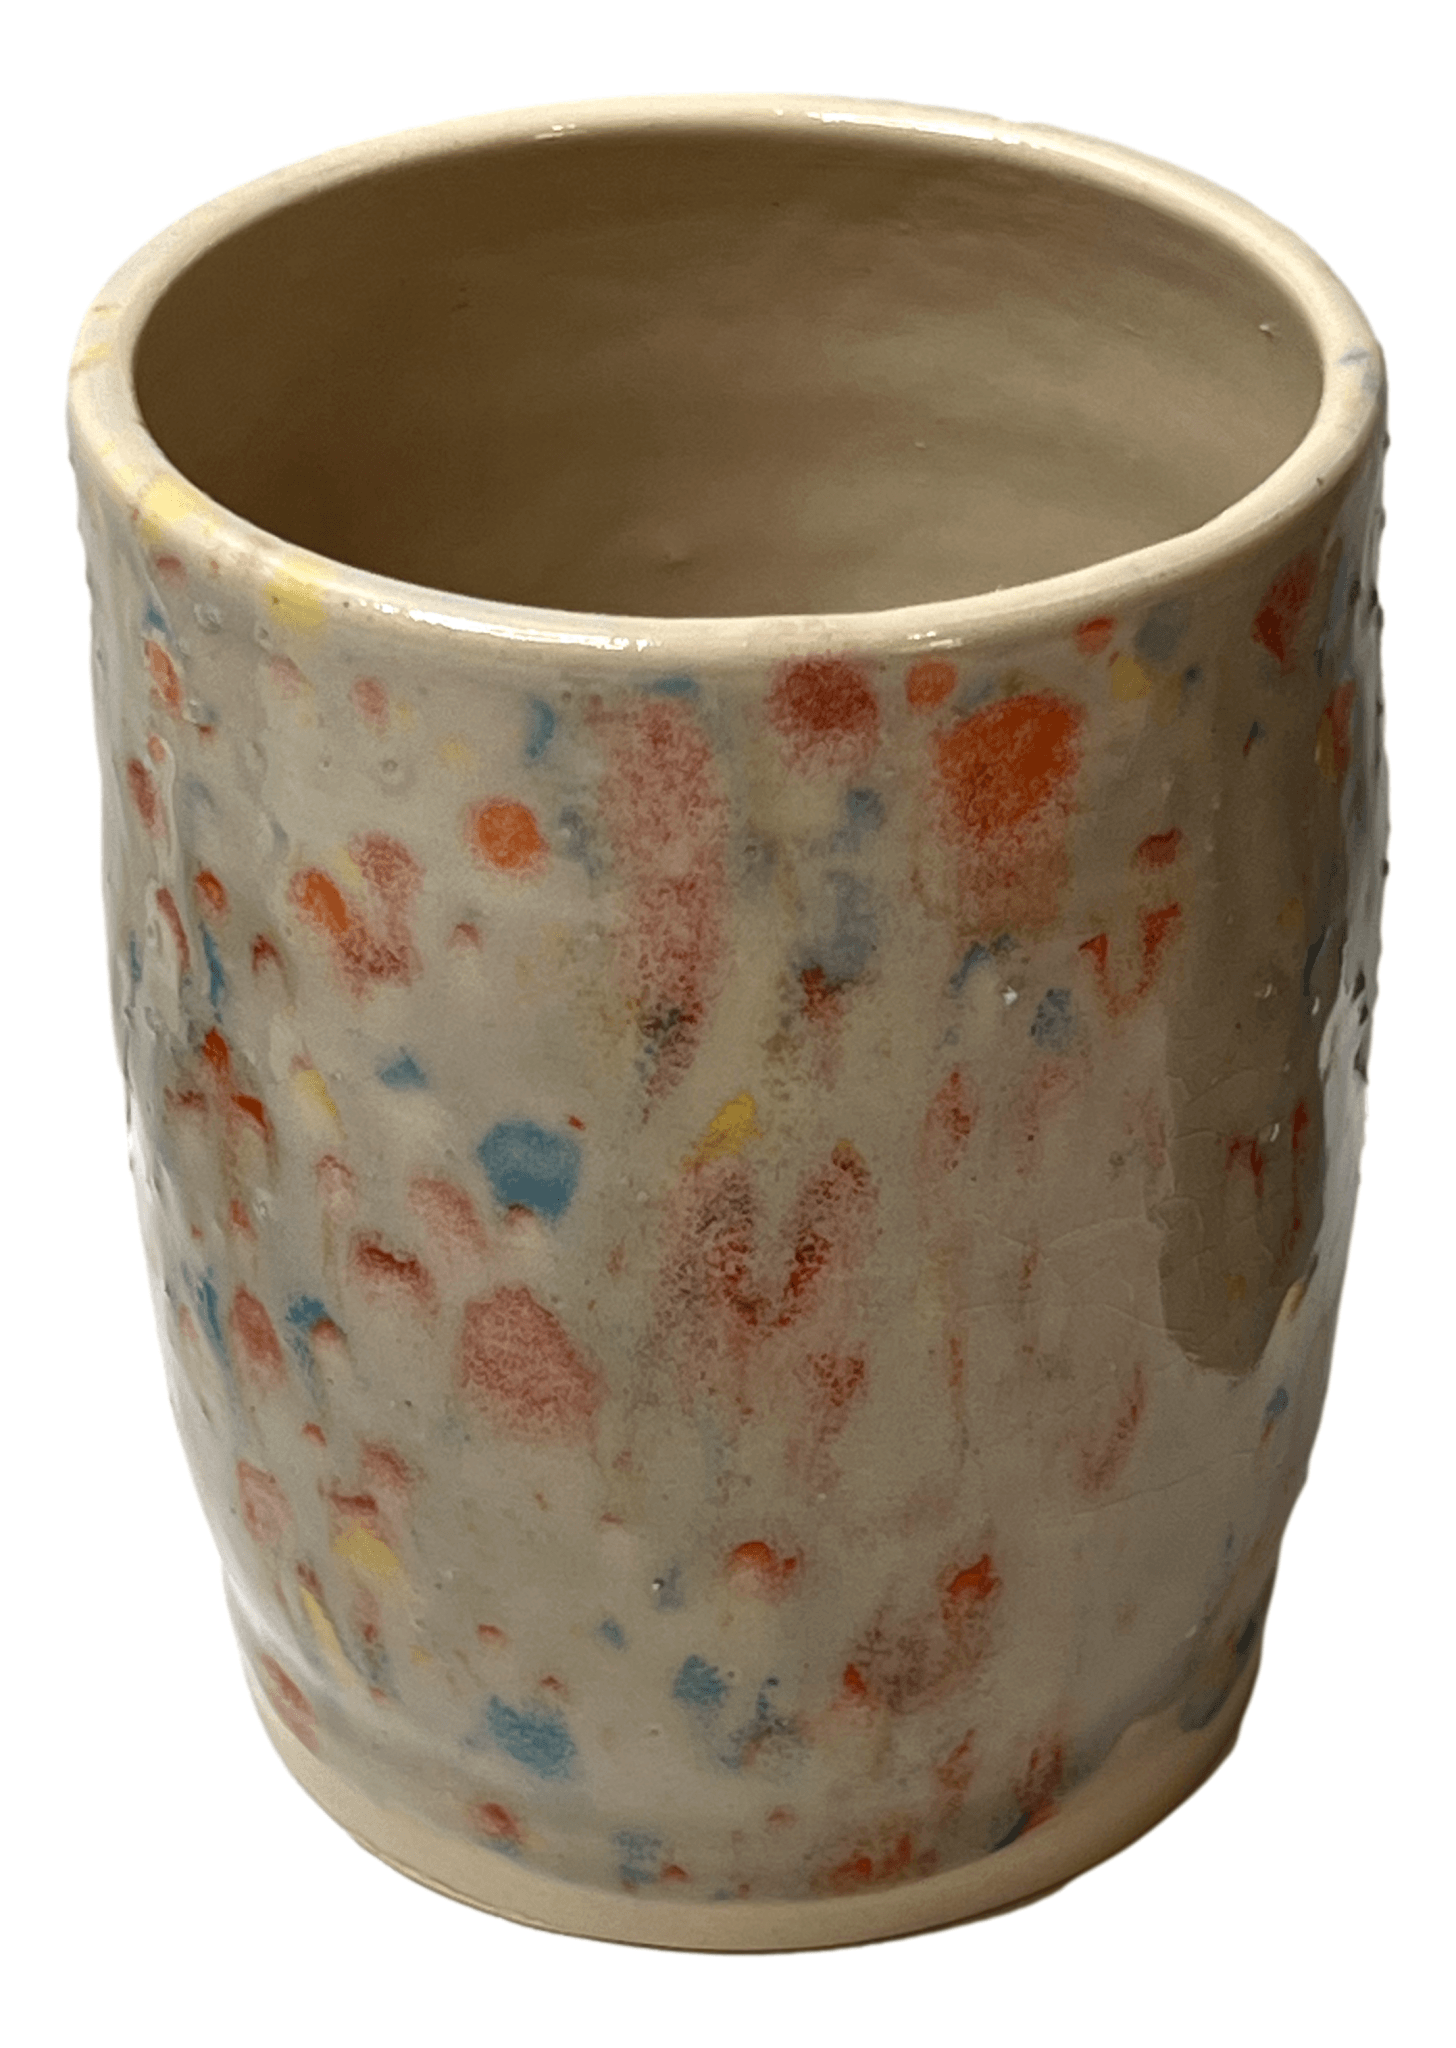 Pottery Planter Pot Wheel Thrown Clay Creatively Glazed Handcrafted By New Mexico Artist H: 5 inches X W: 4 inches X D: 4.5 inches - Ysleta Mission Gift Shop- VOTED El Paso's Best Gift Shop